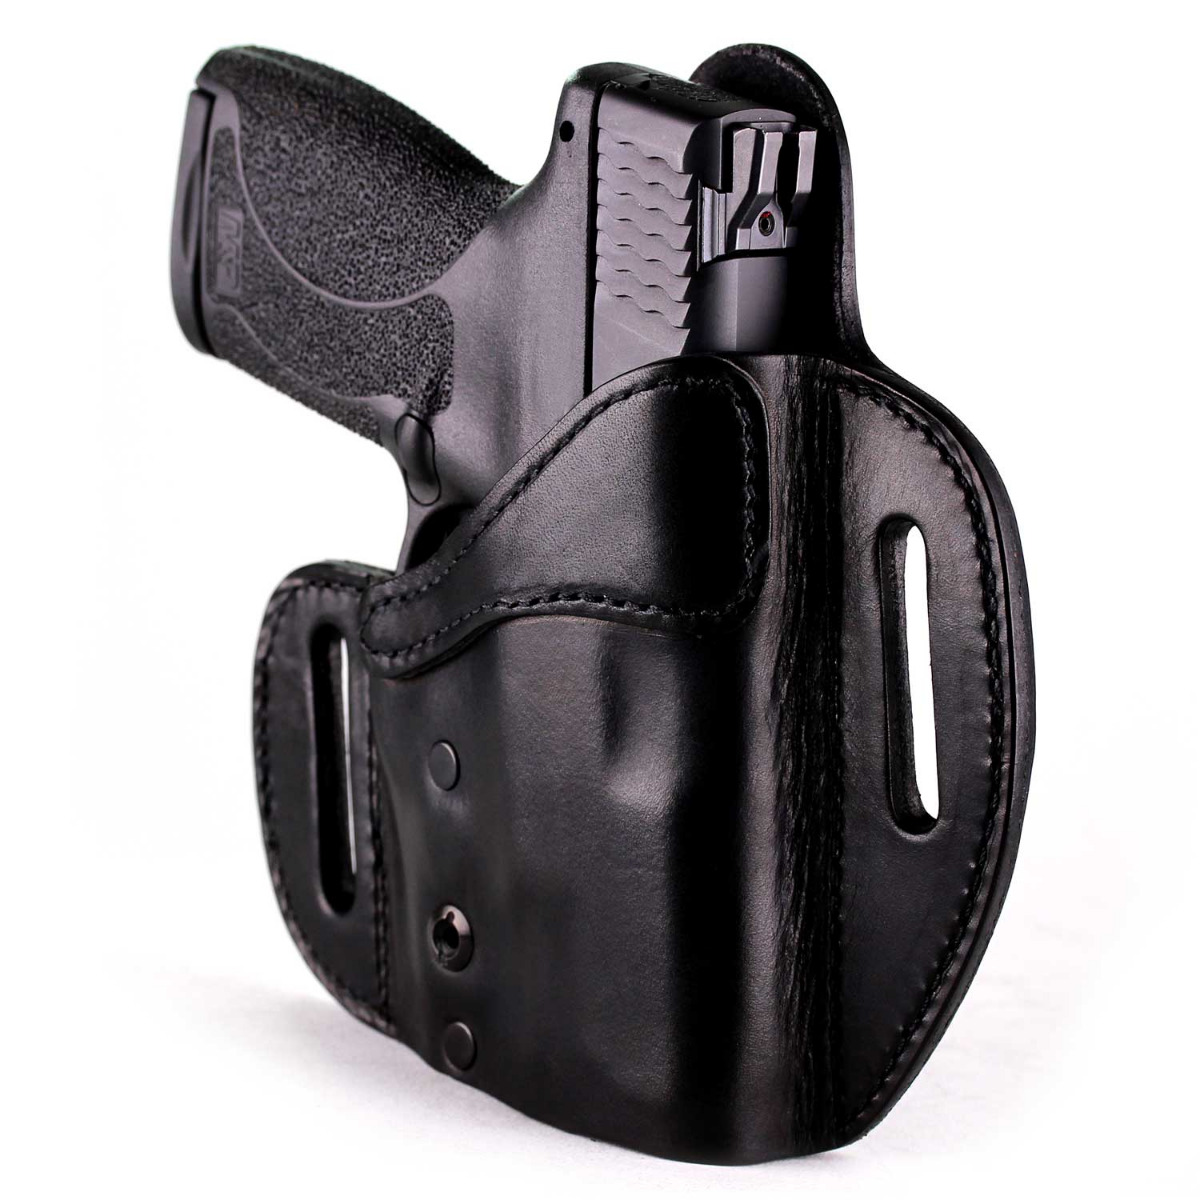 Right handed black leather gun holster for Ruger Security-9 Compact 